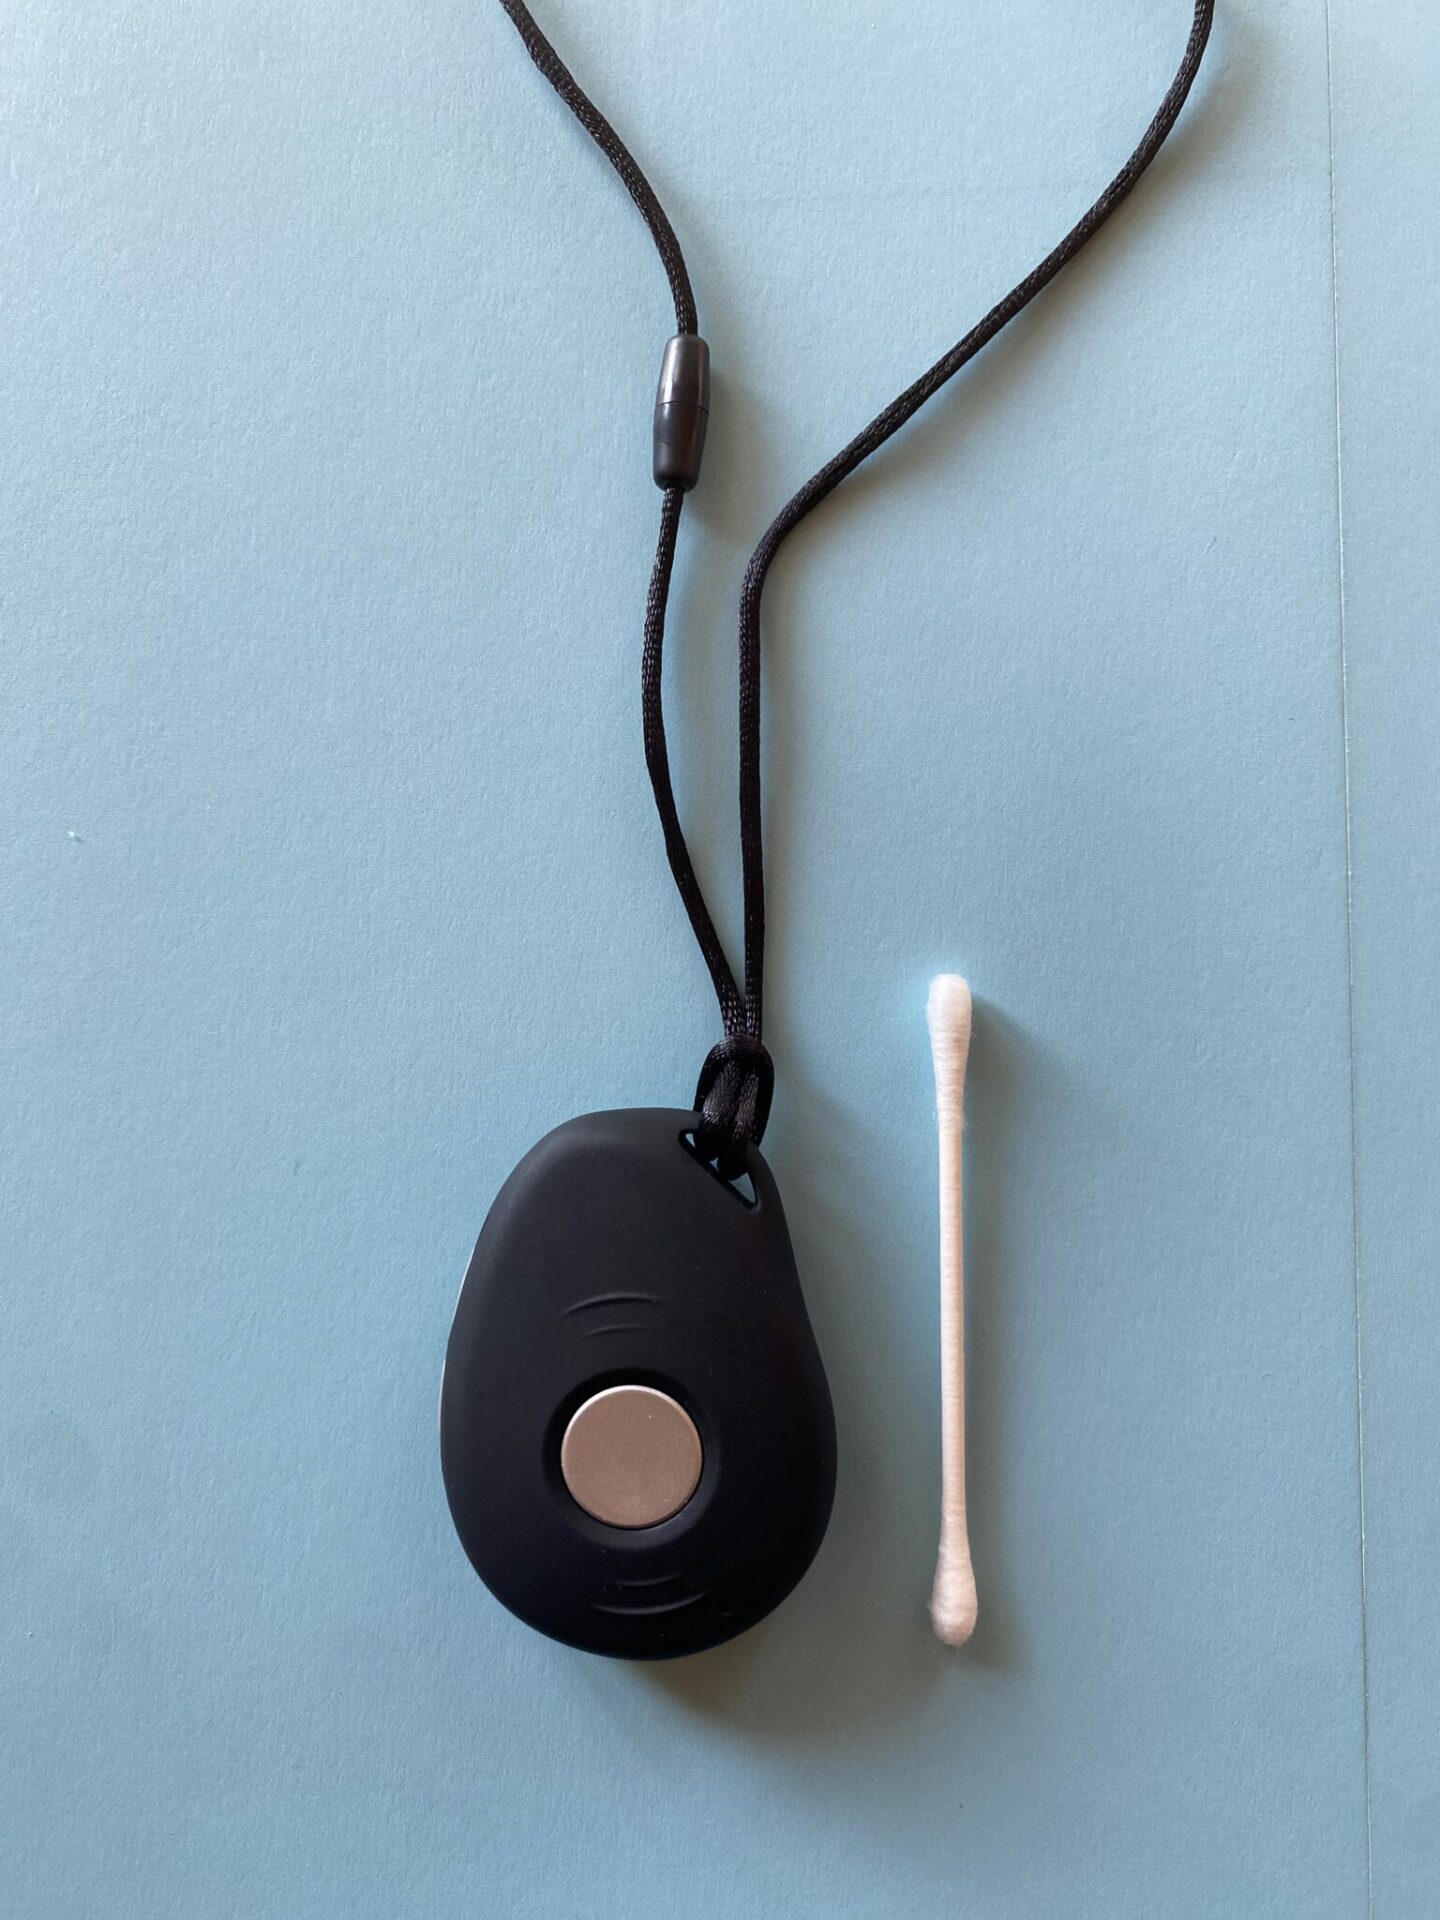 Black LifeFone VIP Active mobile system next to a Q-tip against a blue background